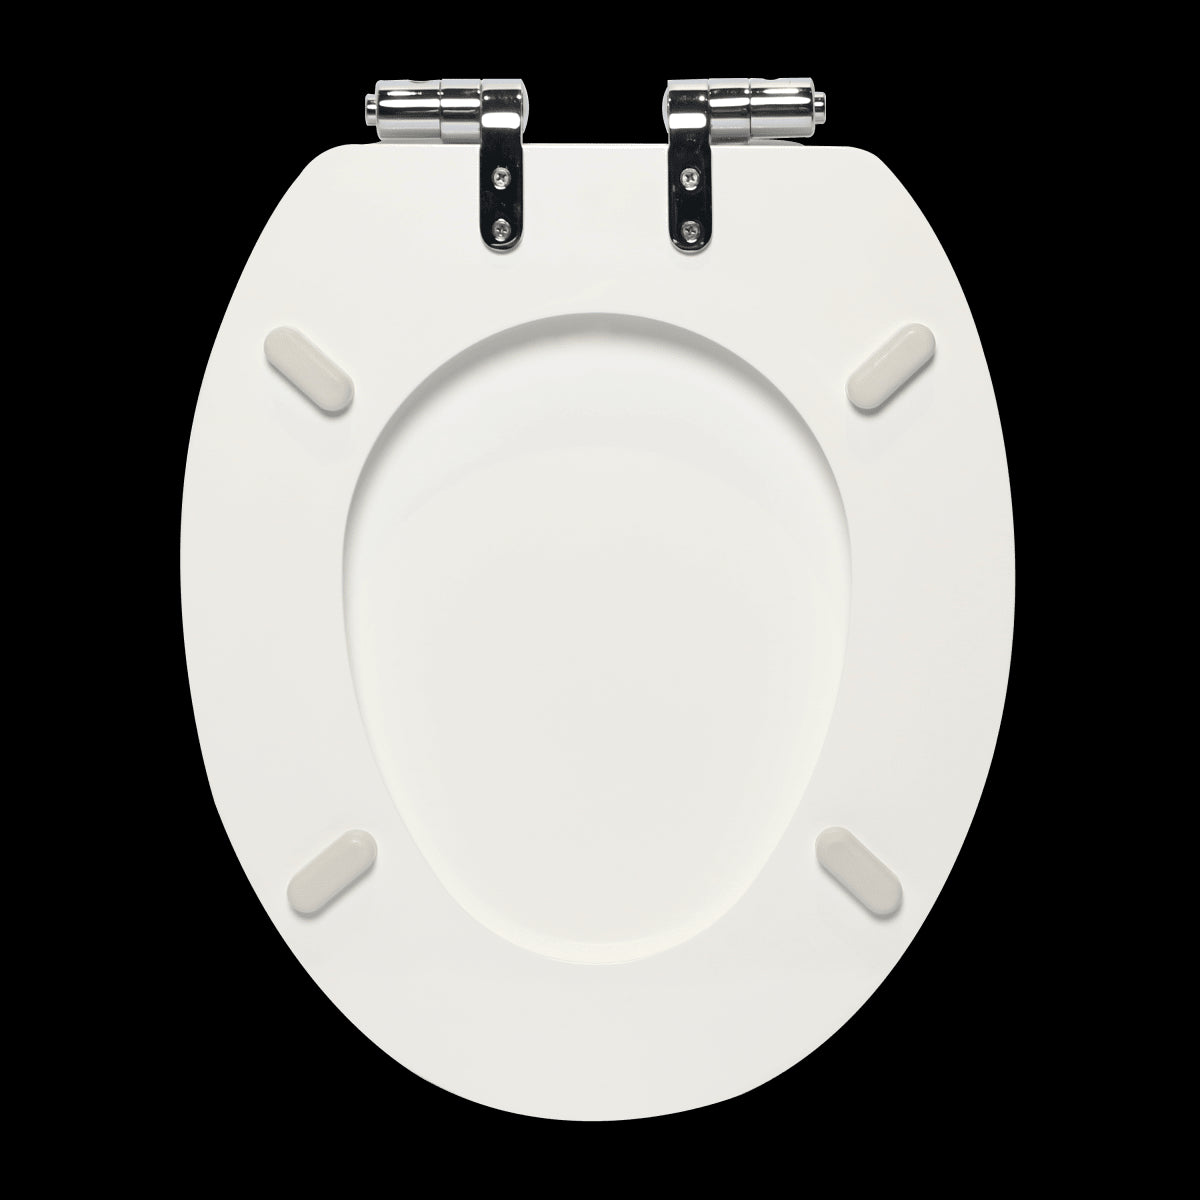 PURITY OVAL WHITE WC SEAT WITH SLOW CLOSING MECHANISM